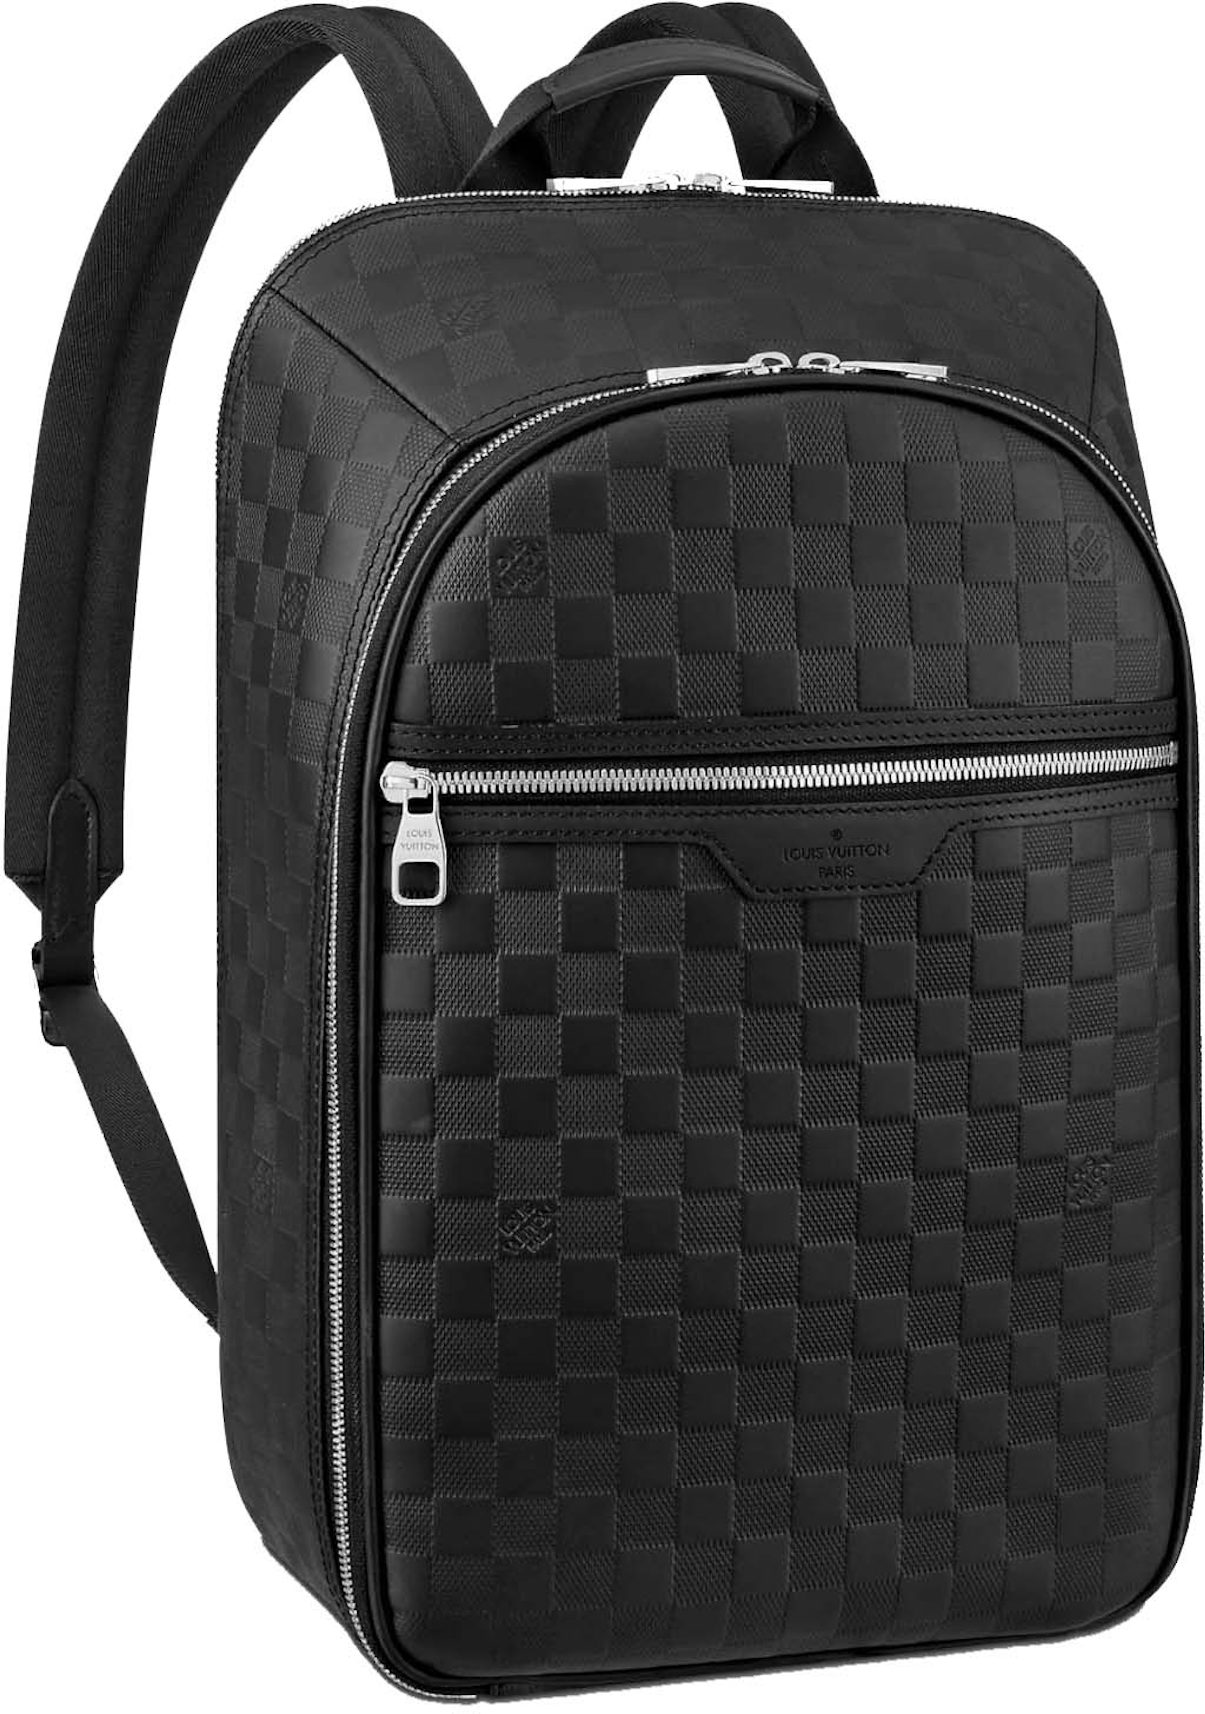 Buy Louis Vuitton Backpack Accessories - Color Black - StockX